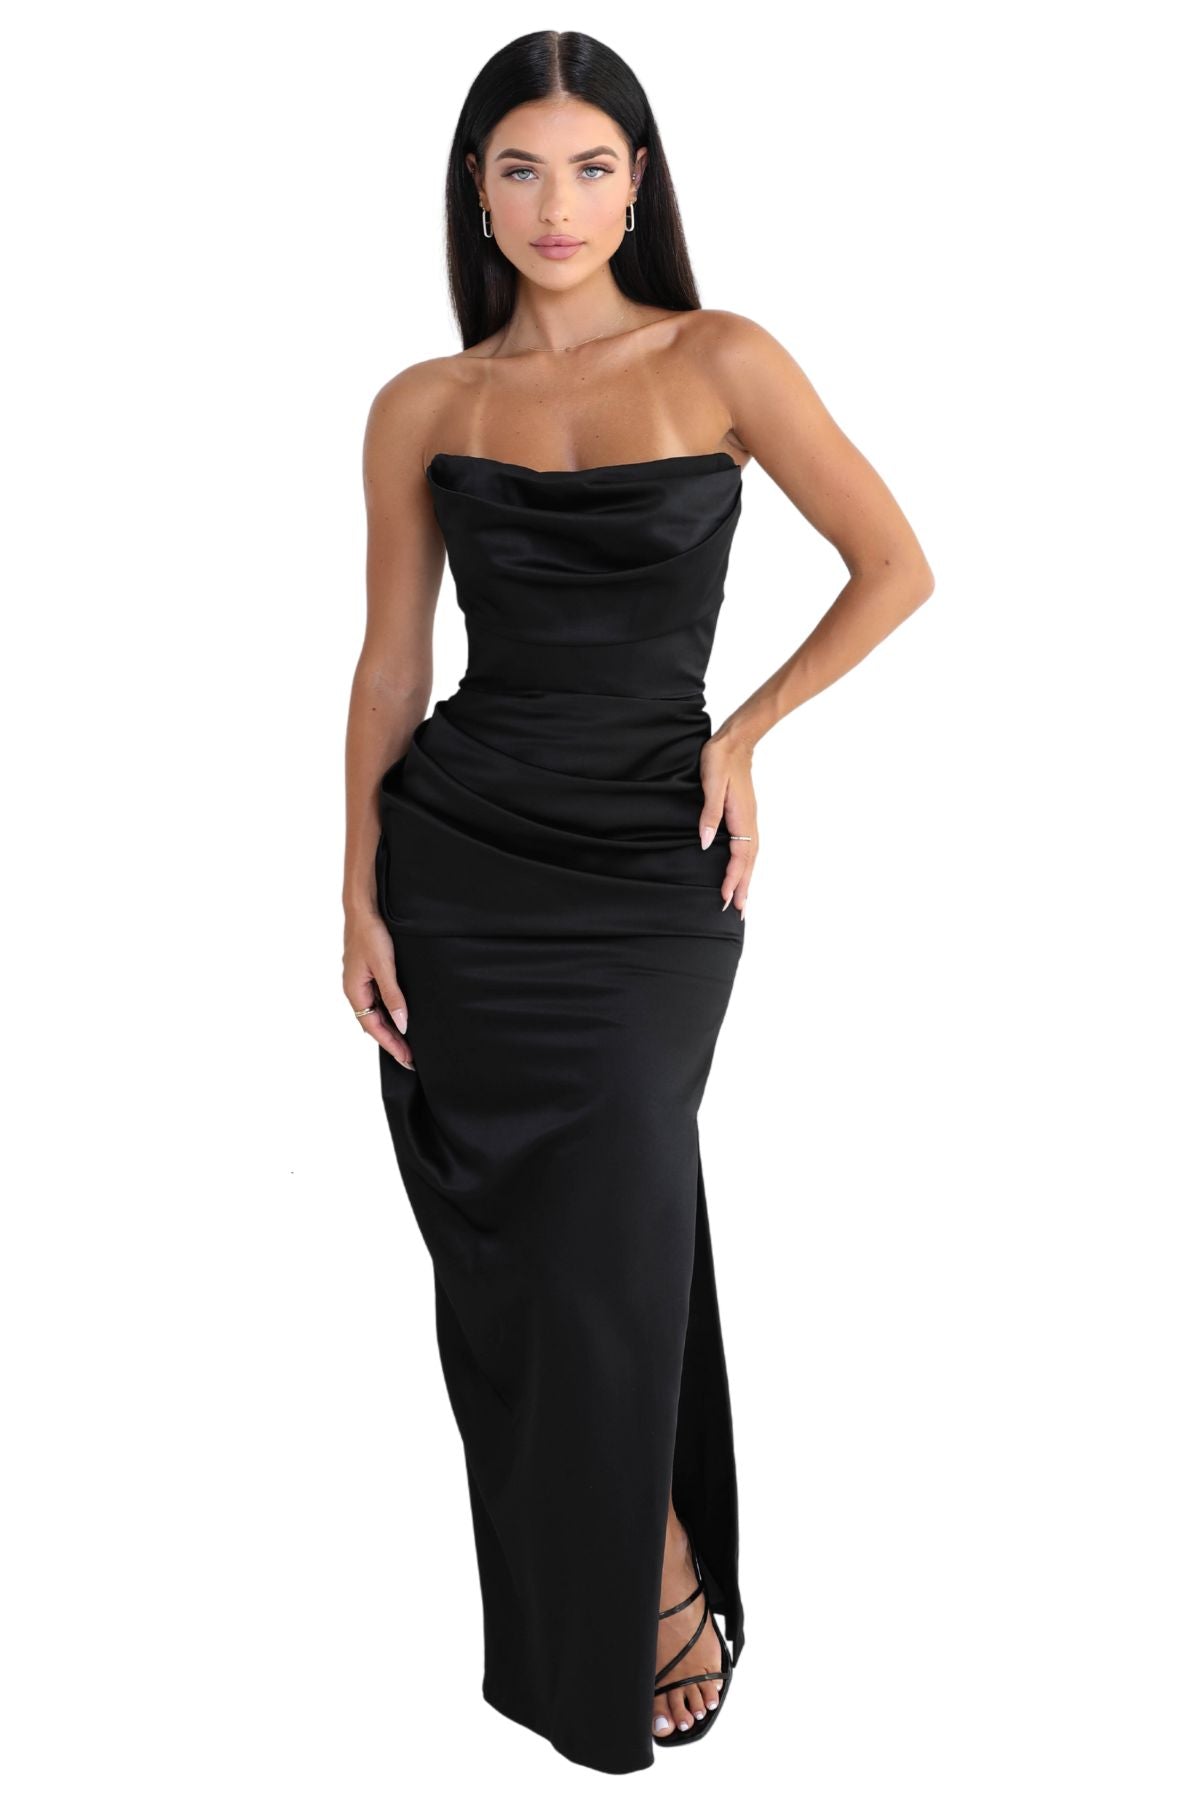 House of CB - Persephone Corset Gown - Black